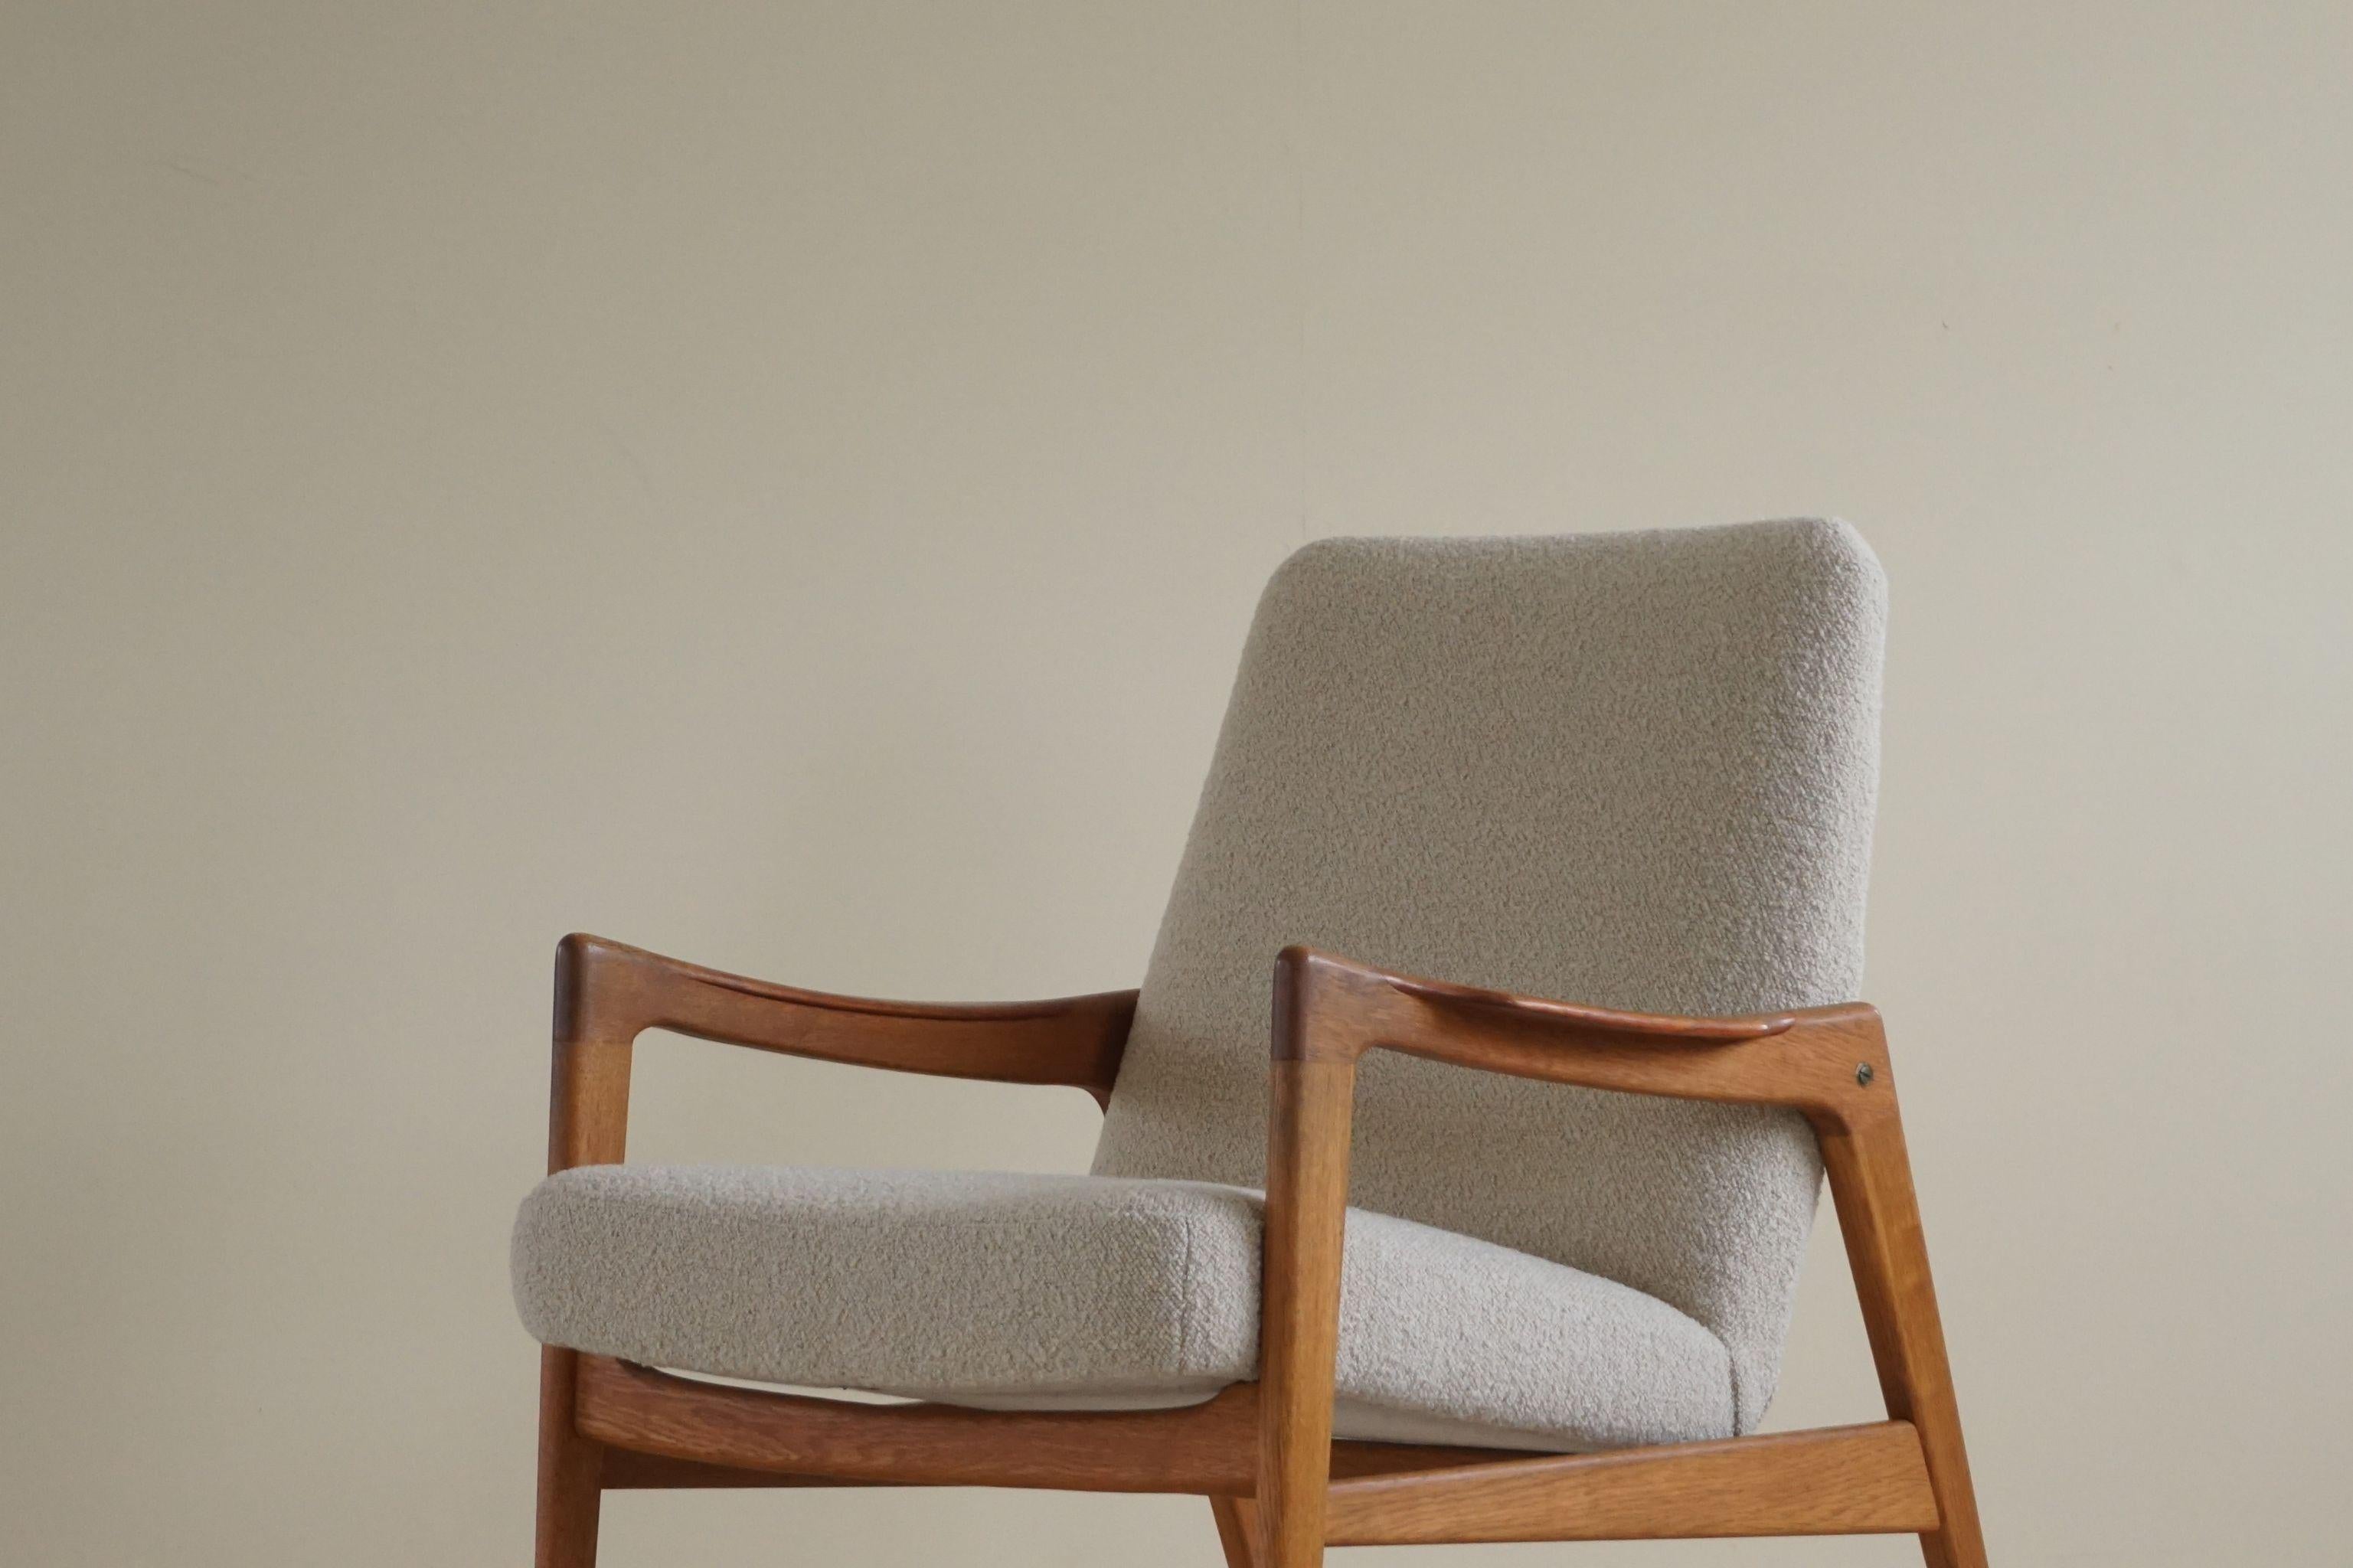 Low back easy chair in teak & oak, reupholstered in grey/beige Bouclé wool. The chair is attributed to danish designers Tove and Edvard Kindt Larsen, 1960s. 

The chair is in great shape and really comfortable.